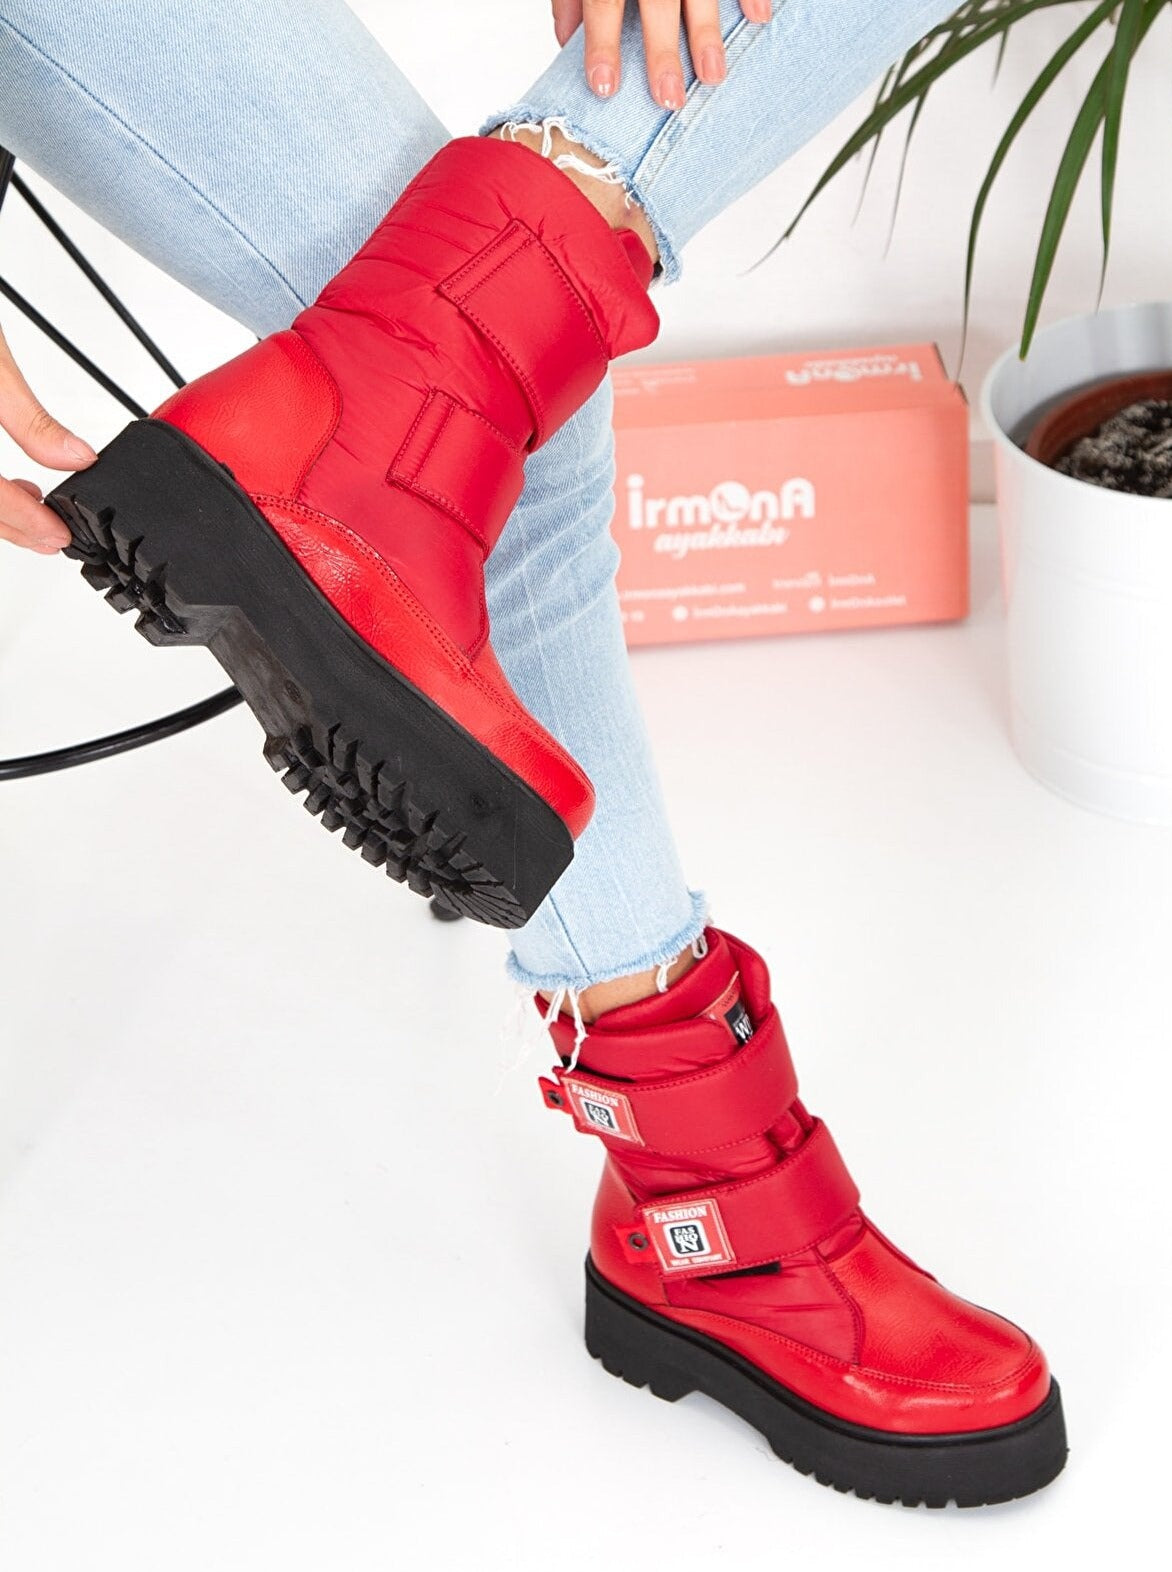 patent leather snow boot